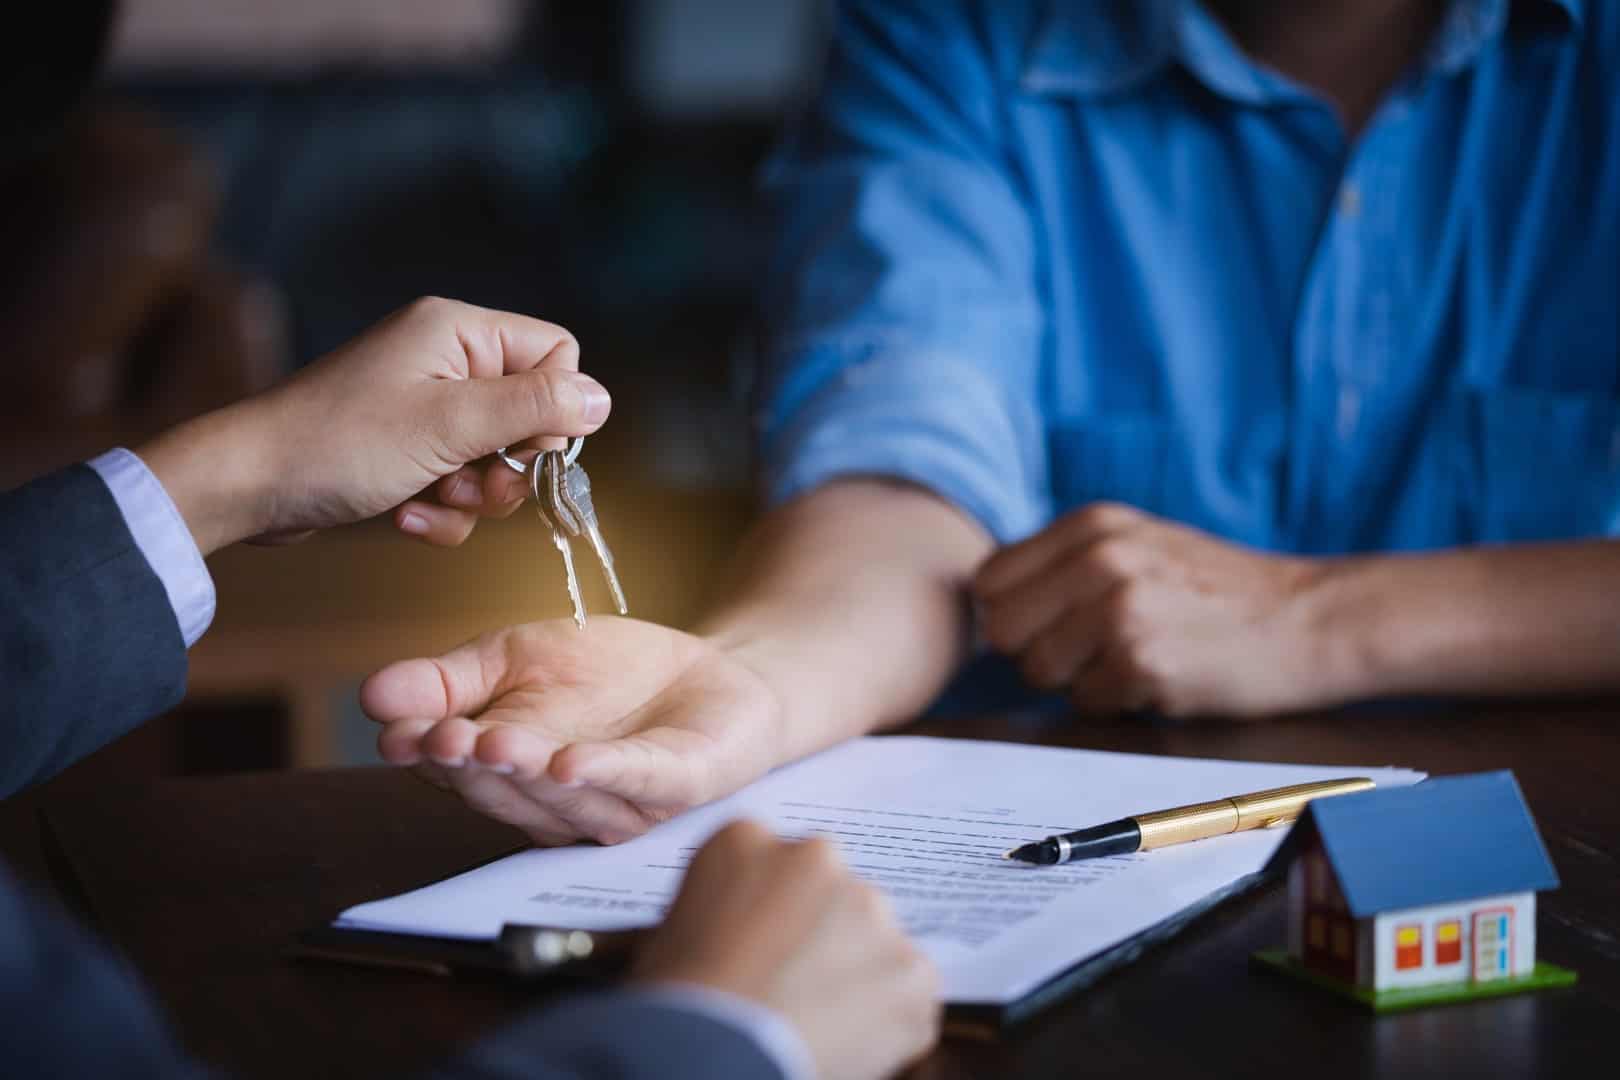 Real estate agent giving keys to new property owners after signing contract,concept agreement and Real estate concept.real estate, moving home or renting property.